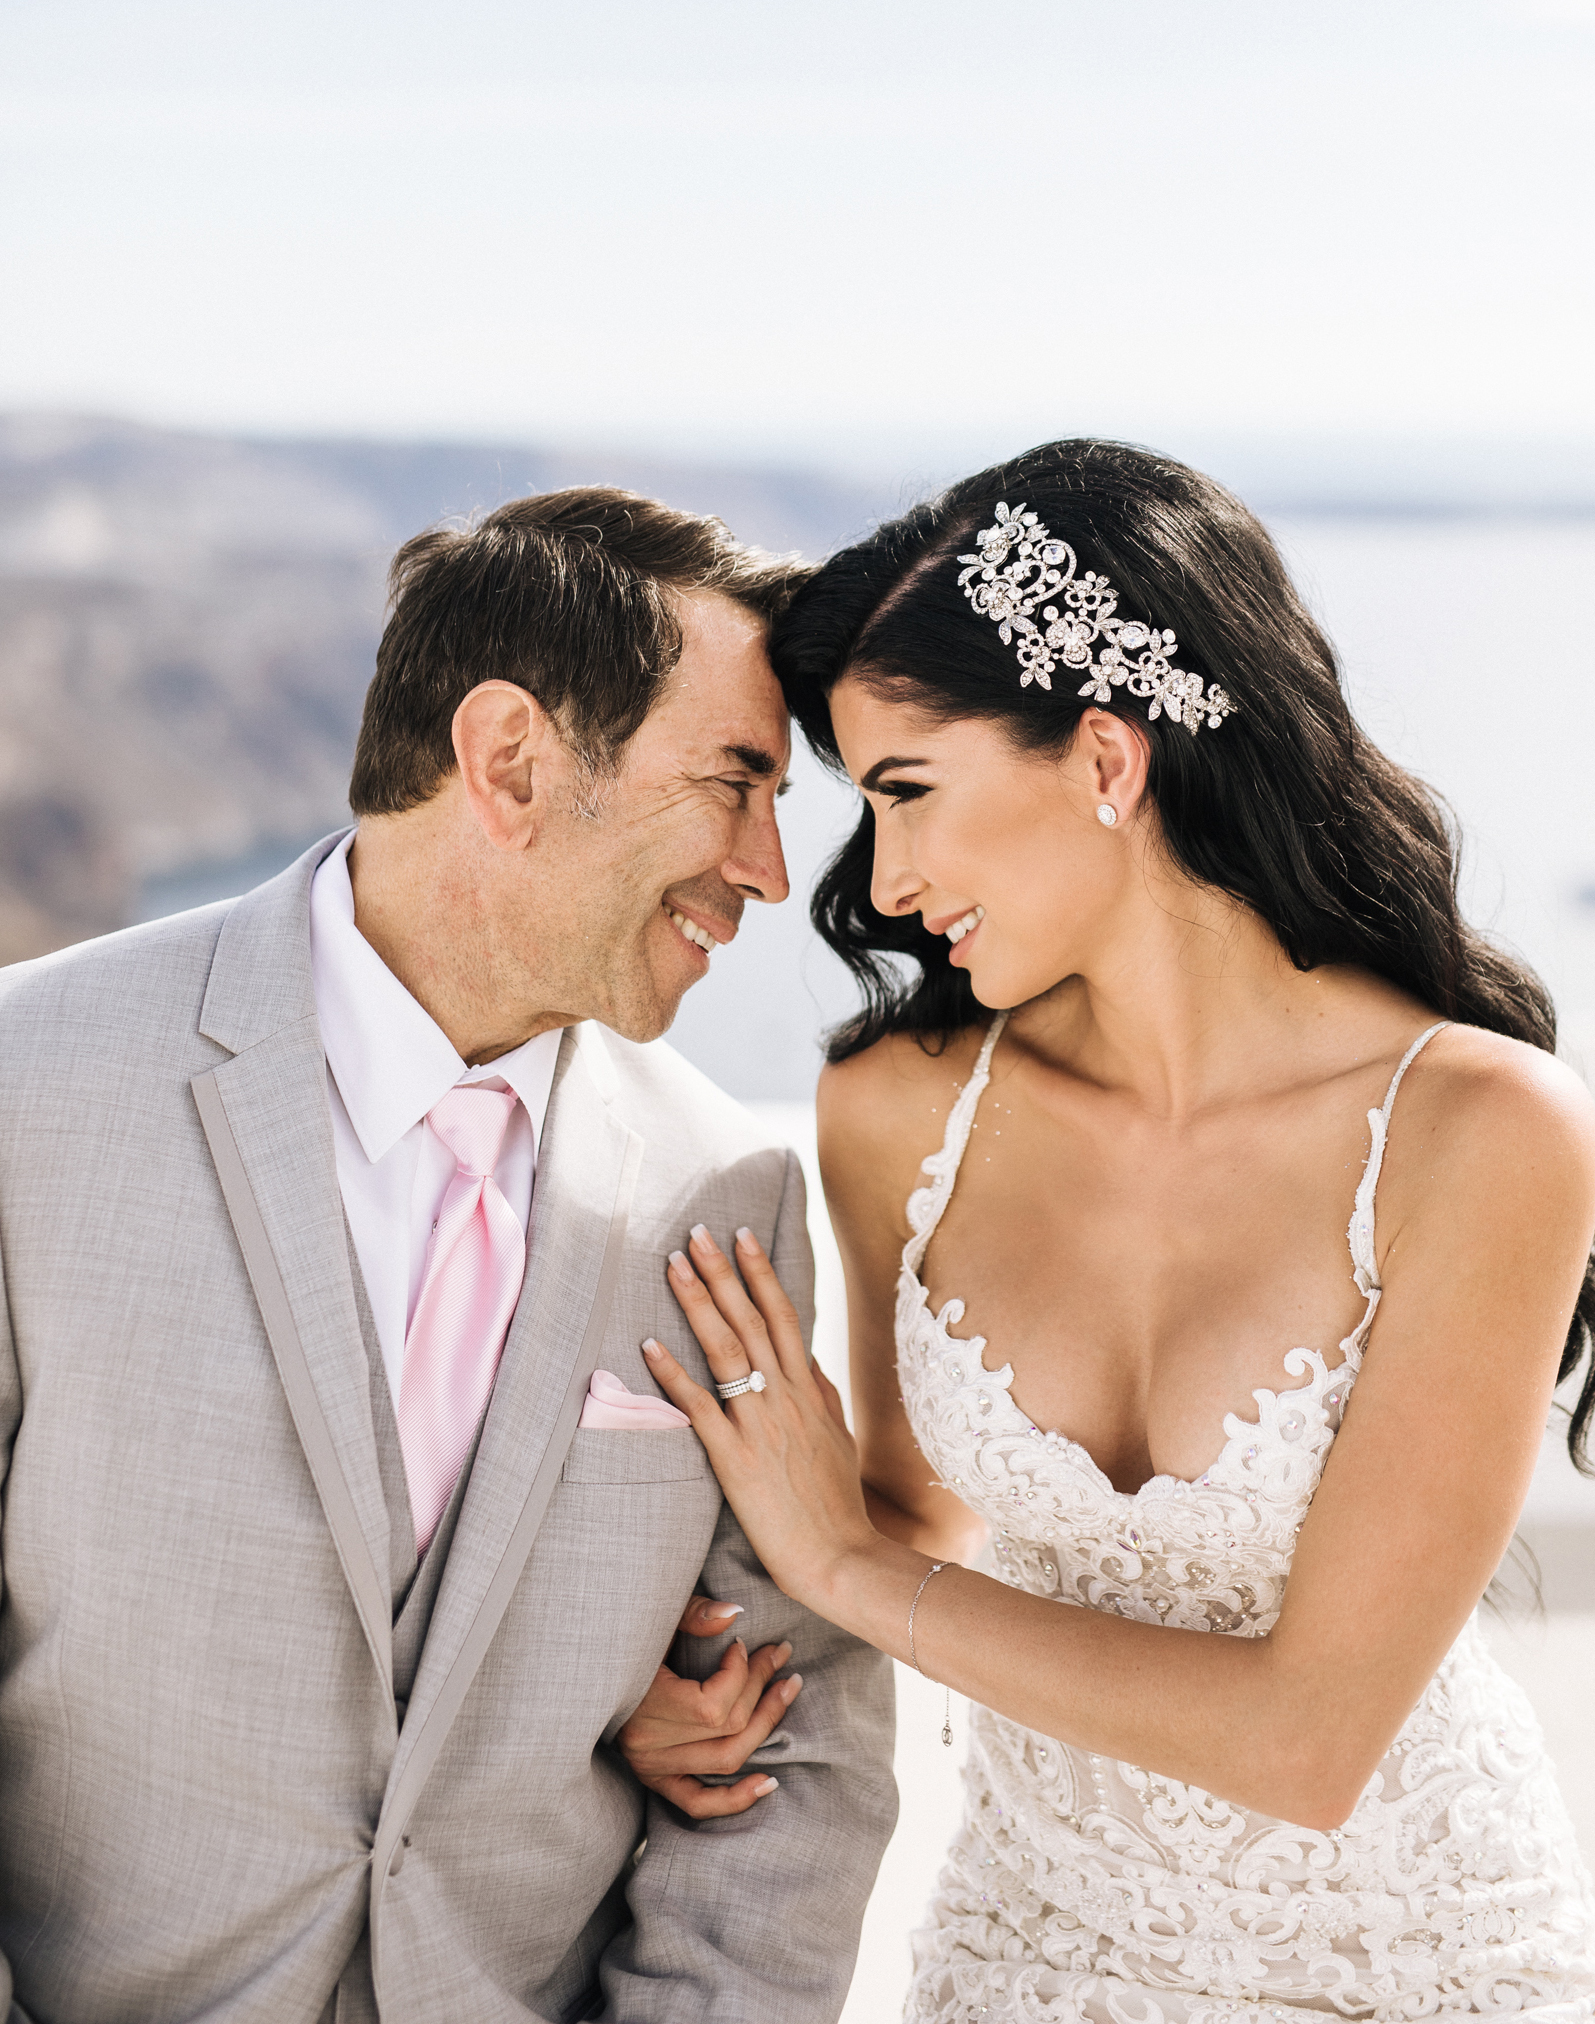 Botched's Dr. Paul Nassif Is Engaged: Botched Star to Marry Brittany  Pattakos